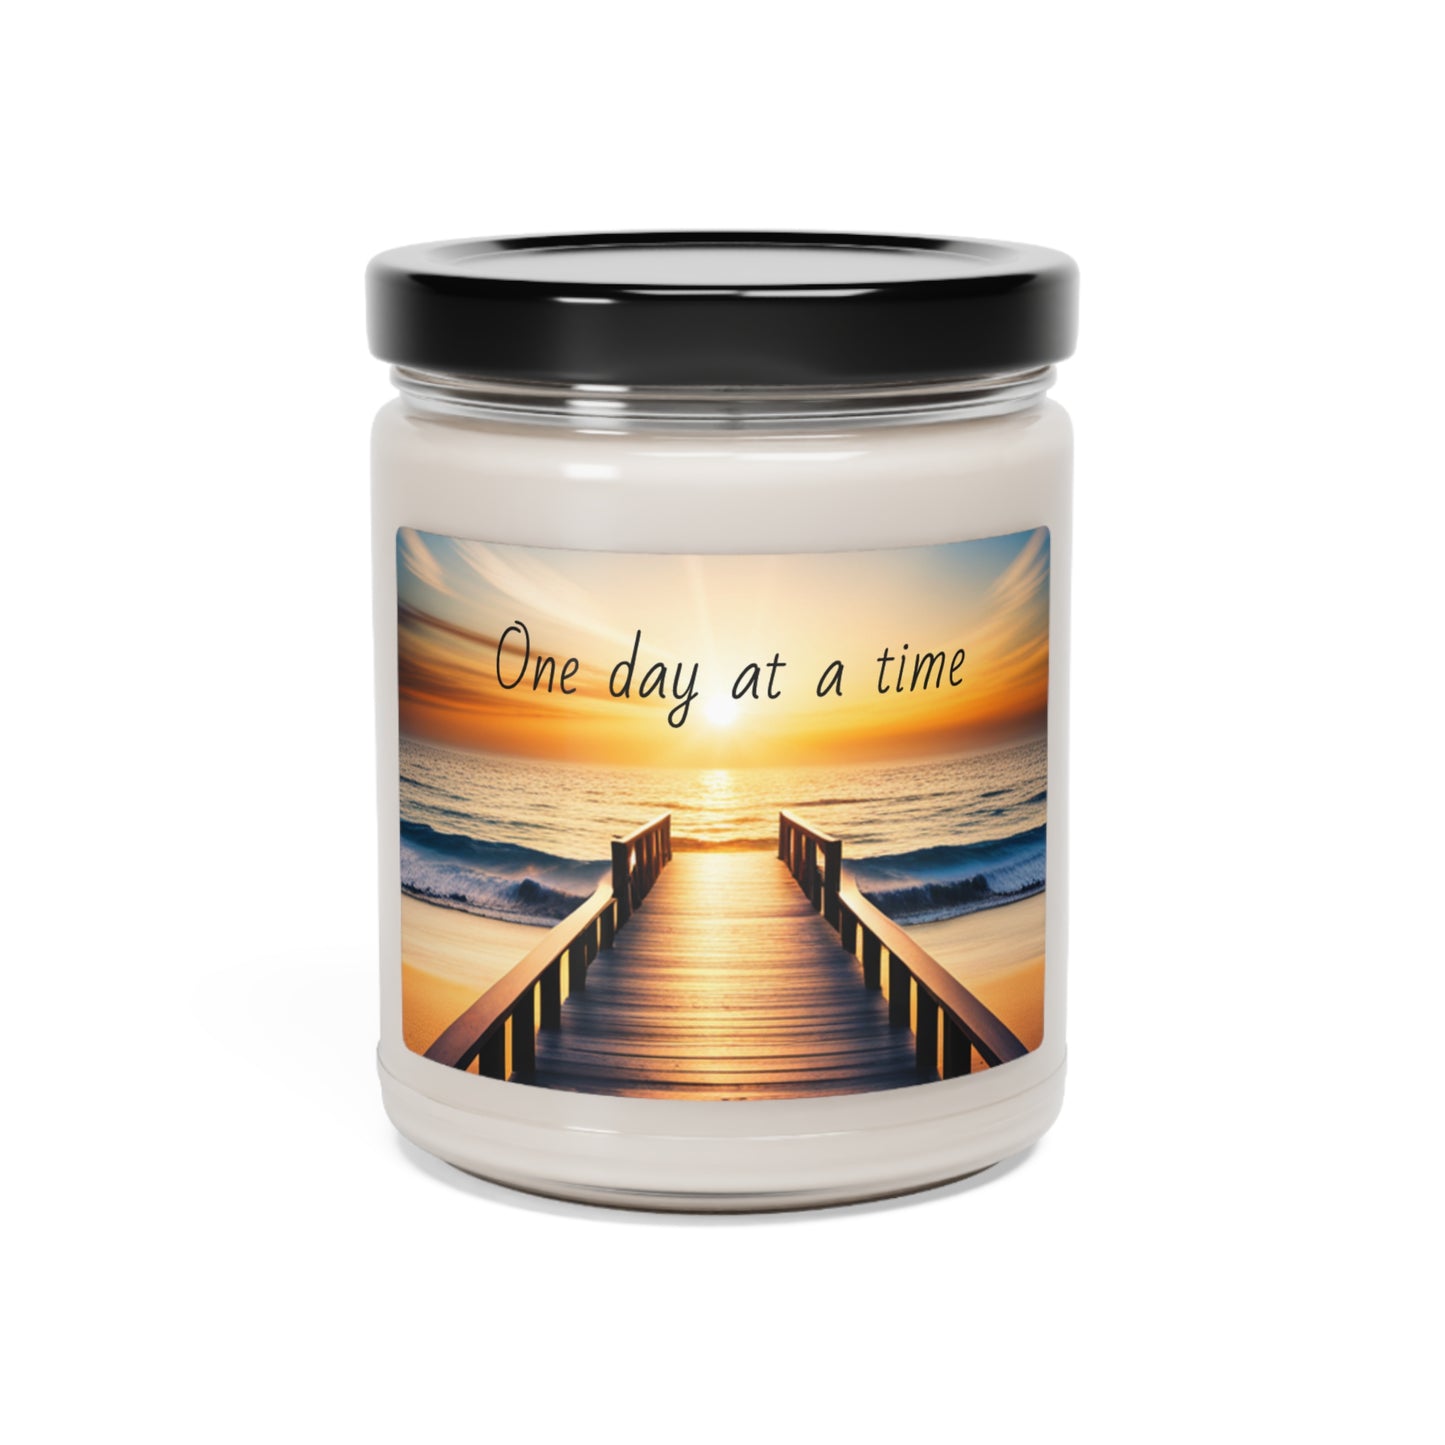 One Day at a time Scented Soy Candle, 9oz